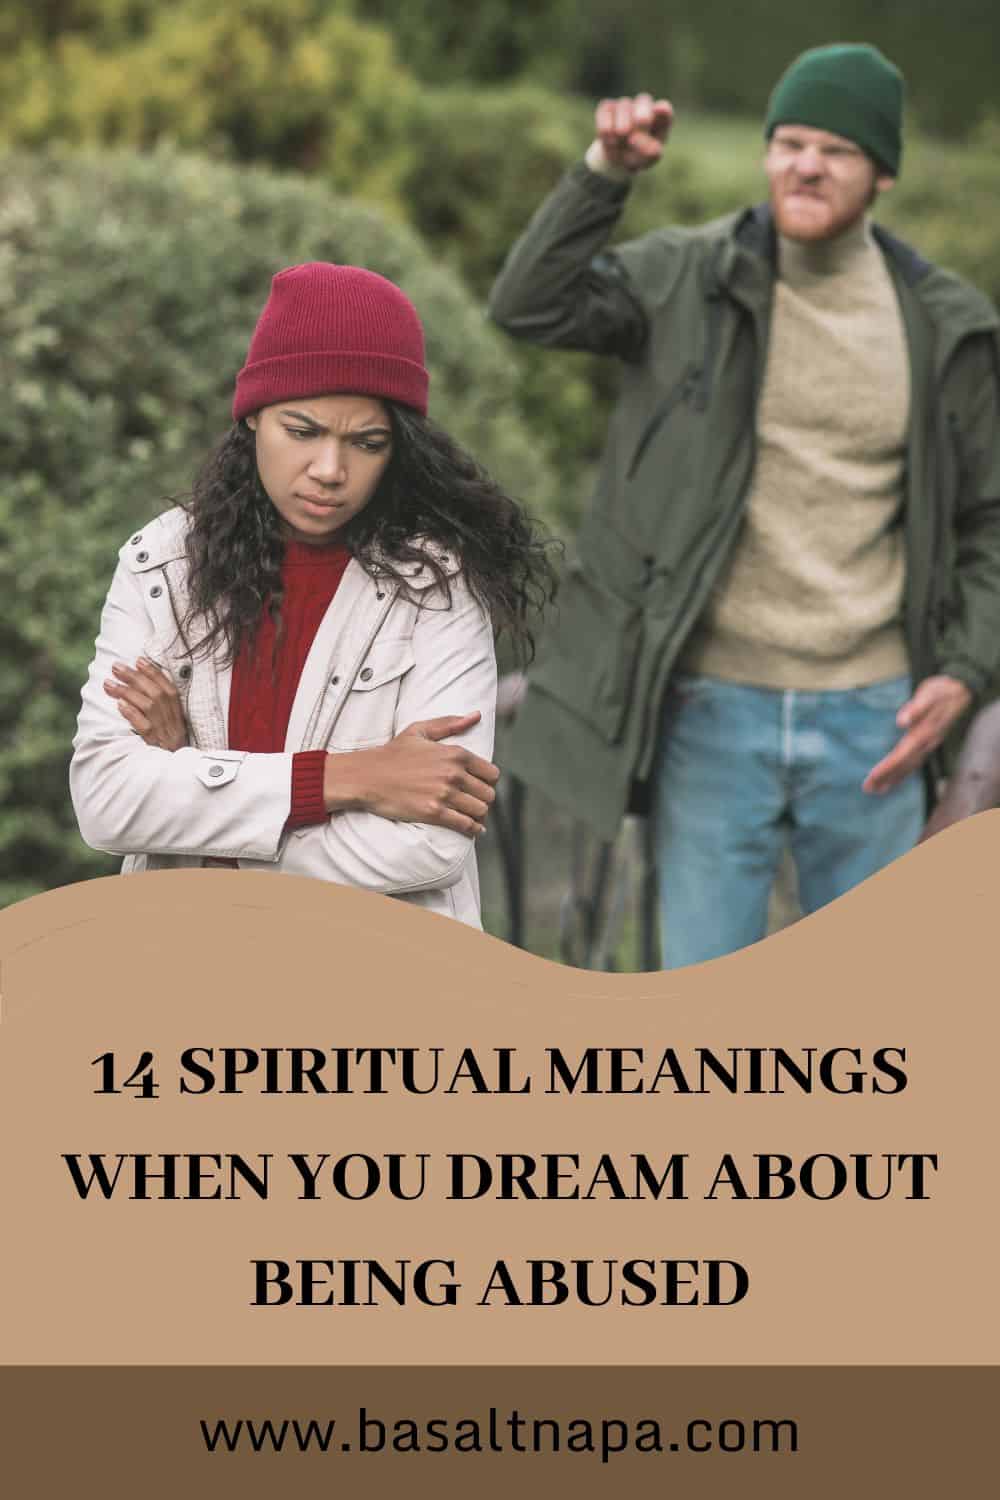 14 Spiritual Meanings When You Dream About Being Abused